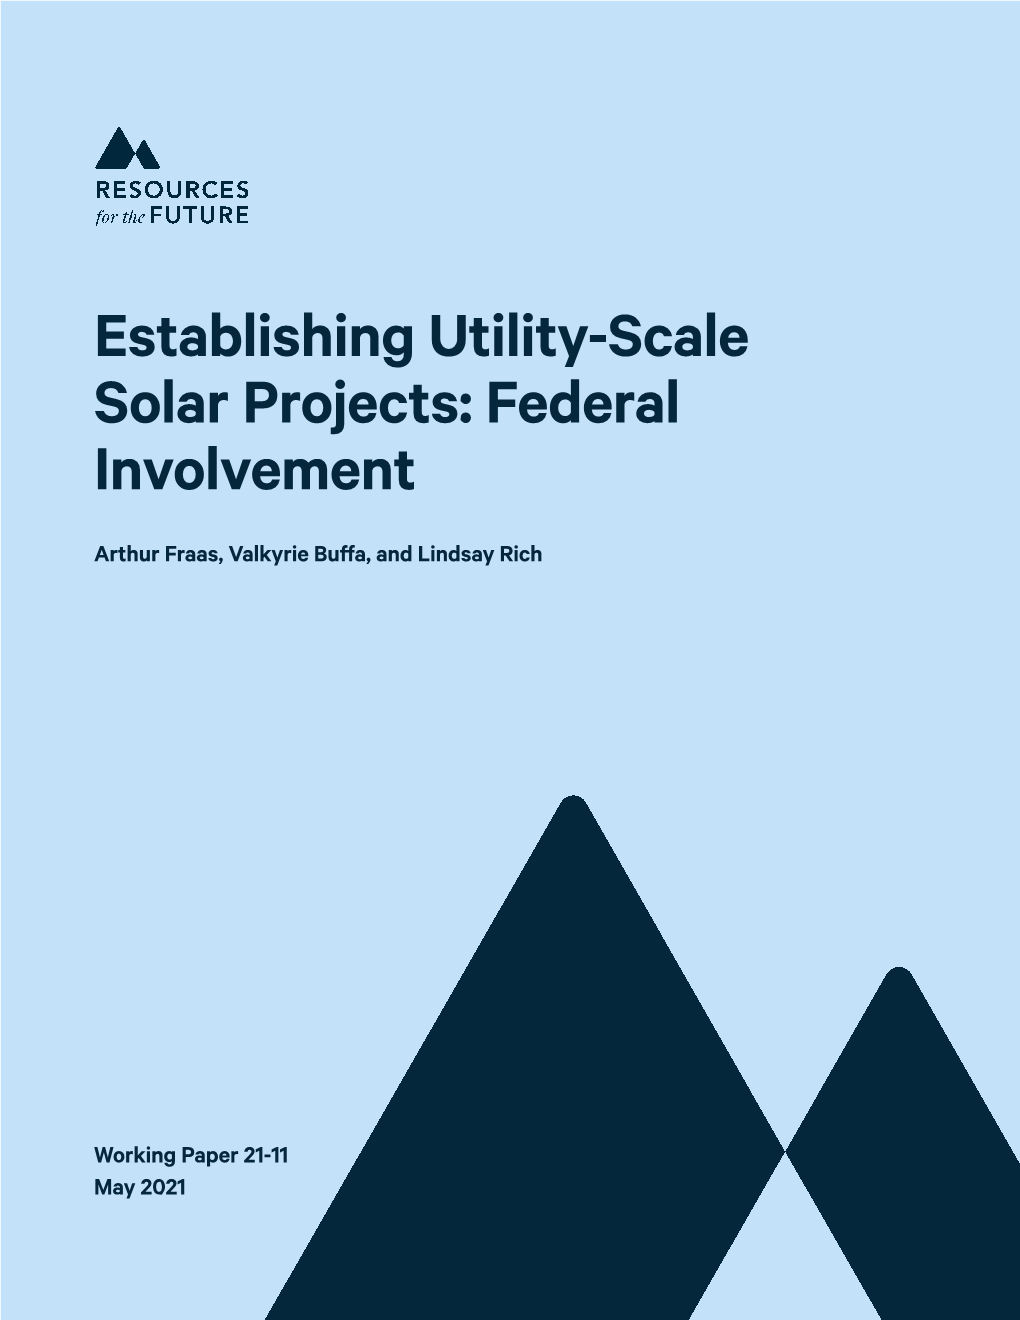 Establishing Utility-Scale Solar Projects: Federal Involvement